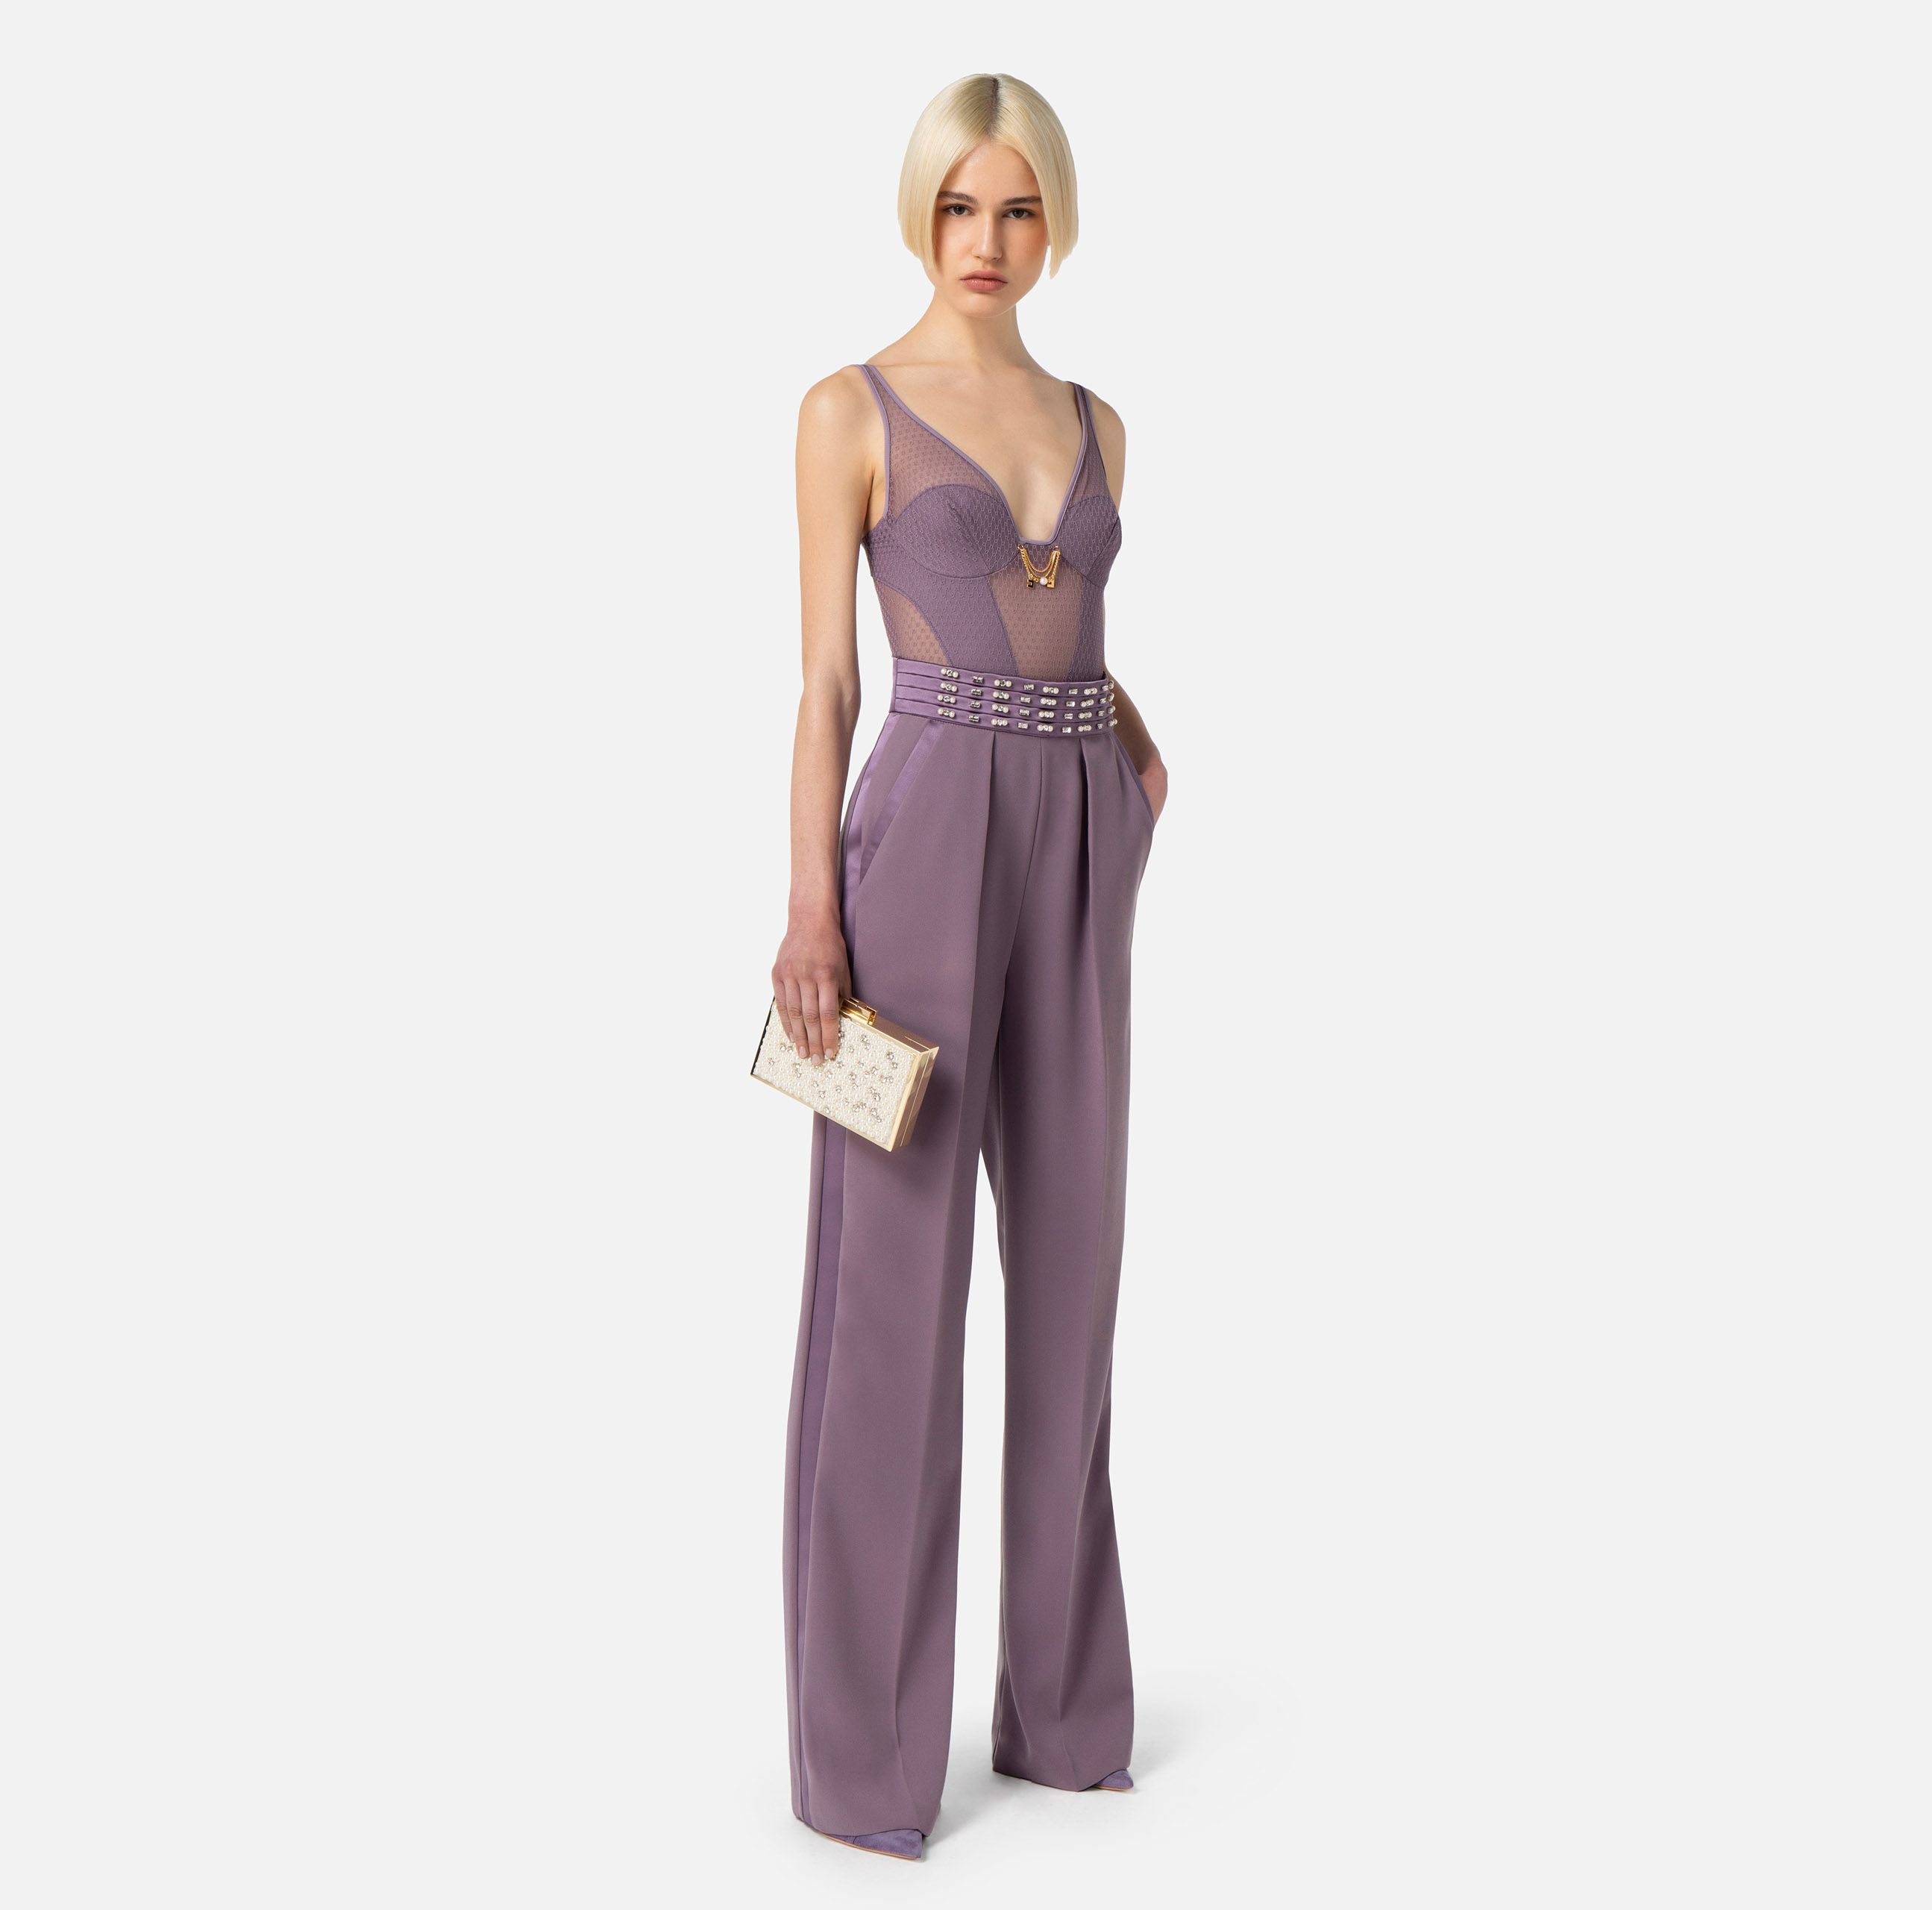 Bodysuit in tulle fabric with embroidery and narrow shoulder straps - Elisabetta Franchi